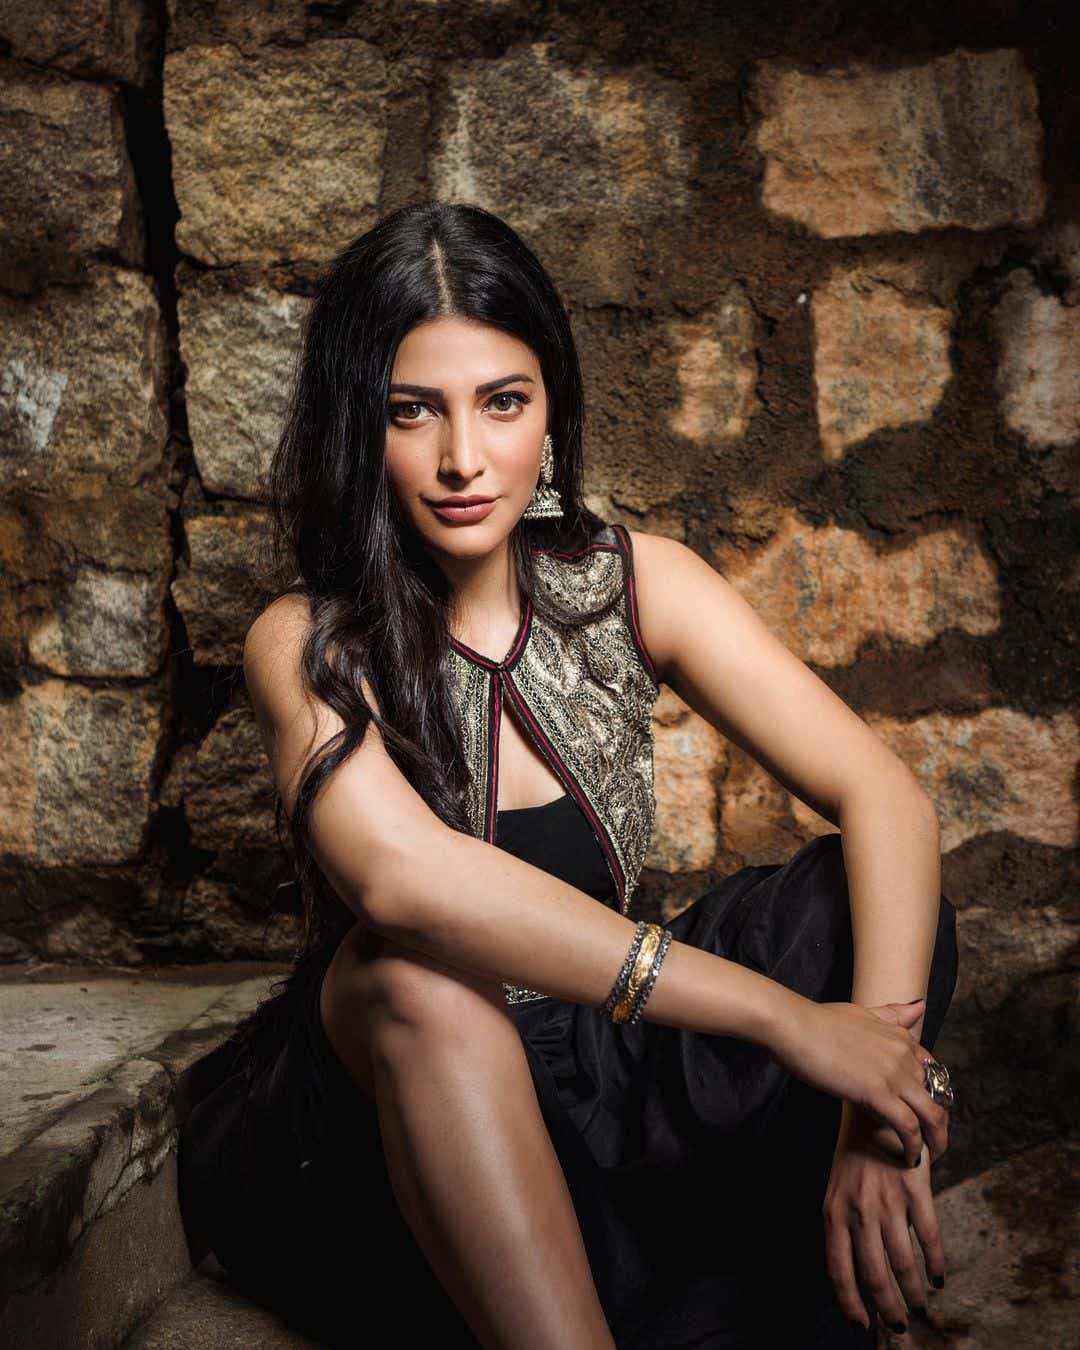 Actress Shruti Haasan looks captivating in a black dress photoshoot. Download high-resolution images for free.